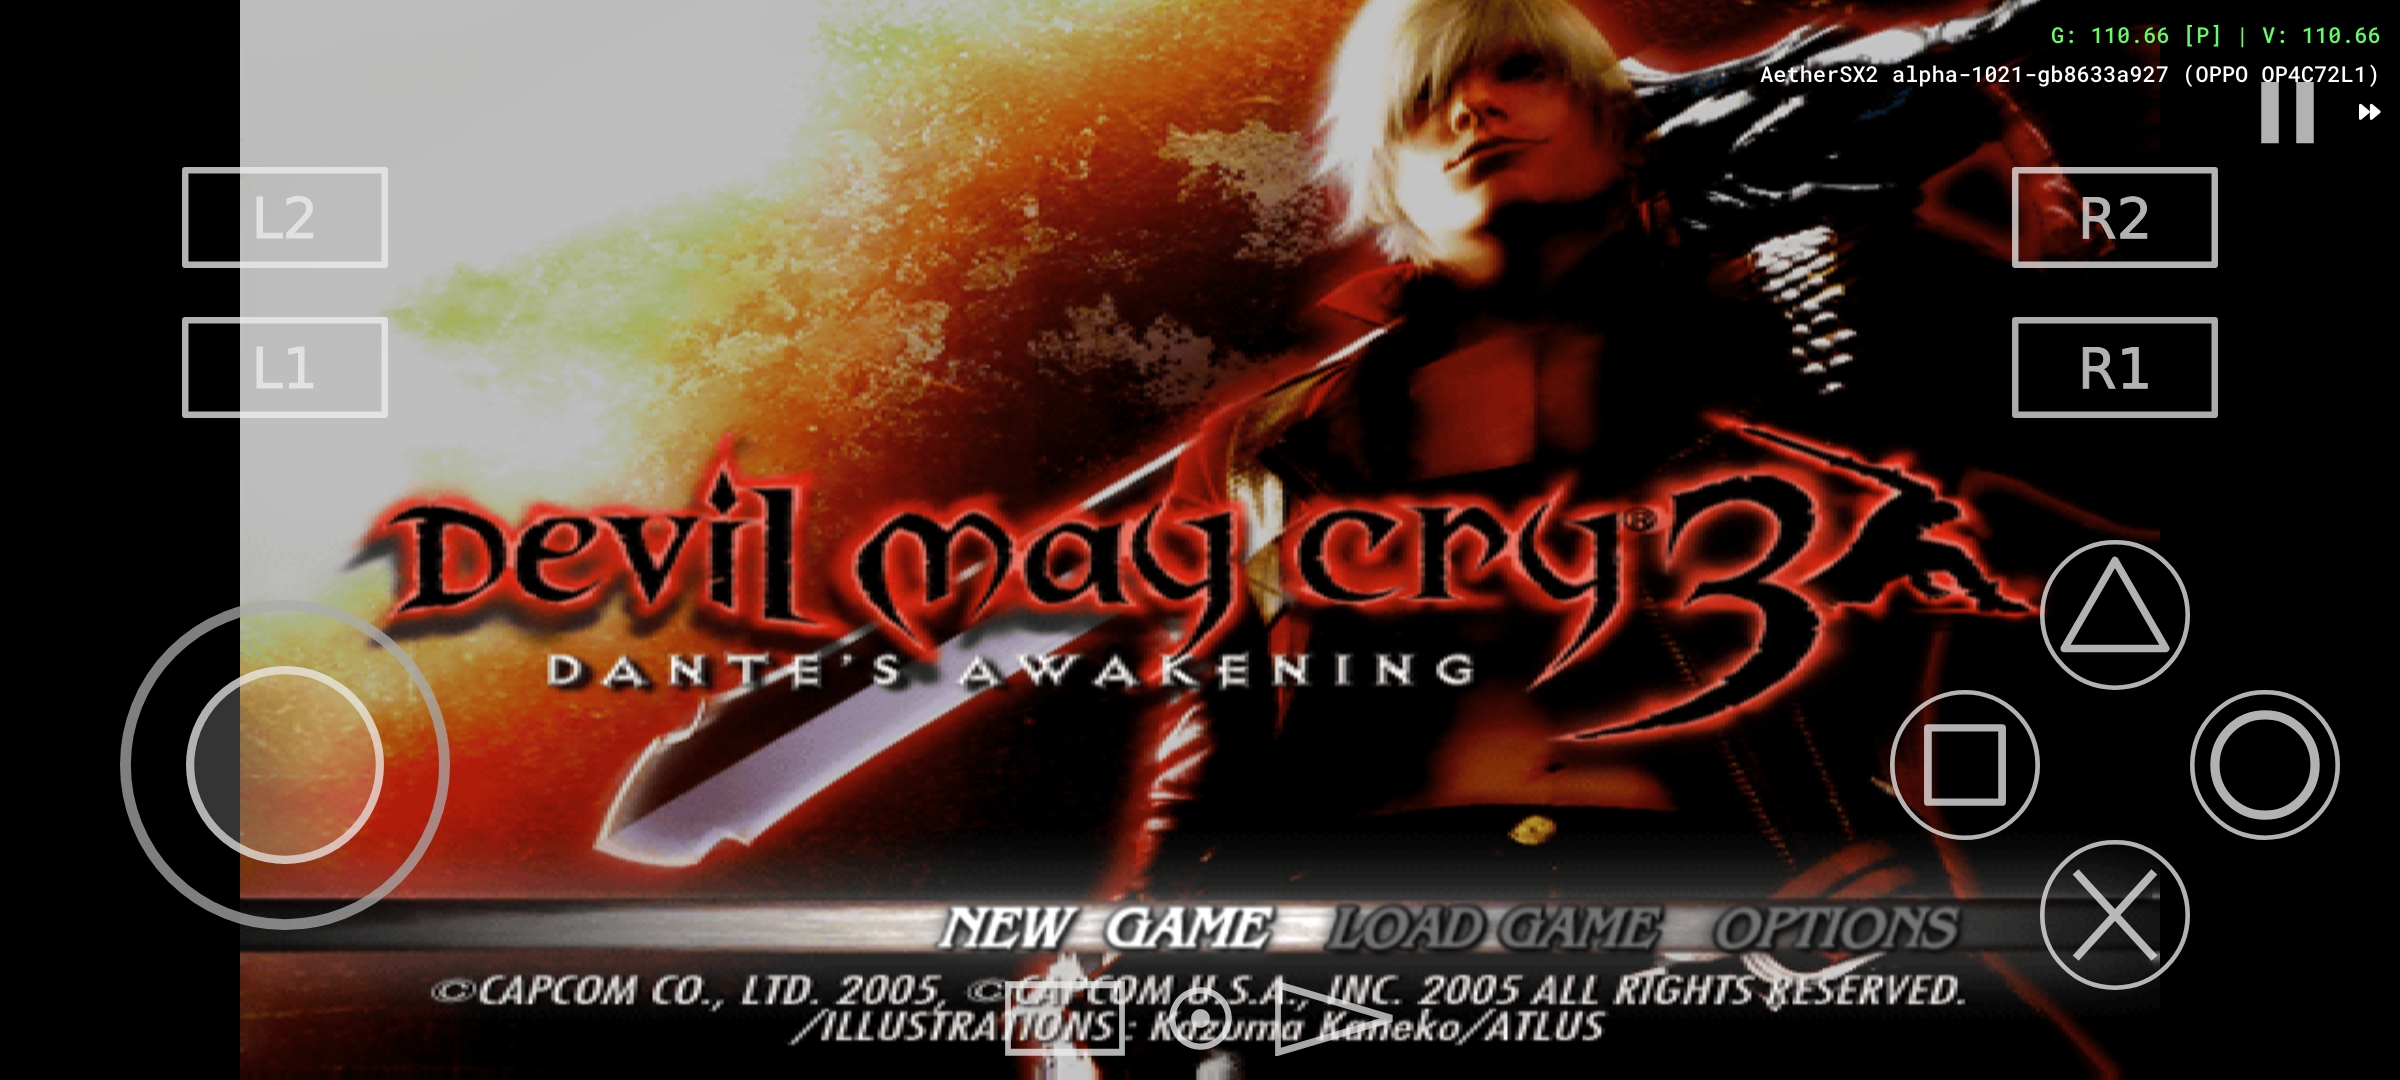 Game Ps2 Devil May Cry 3 Cho Android